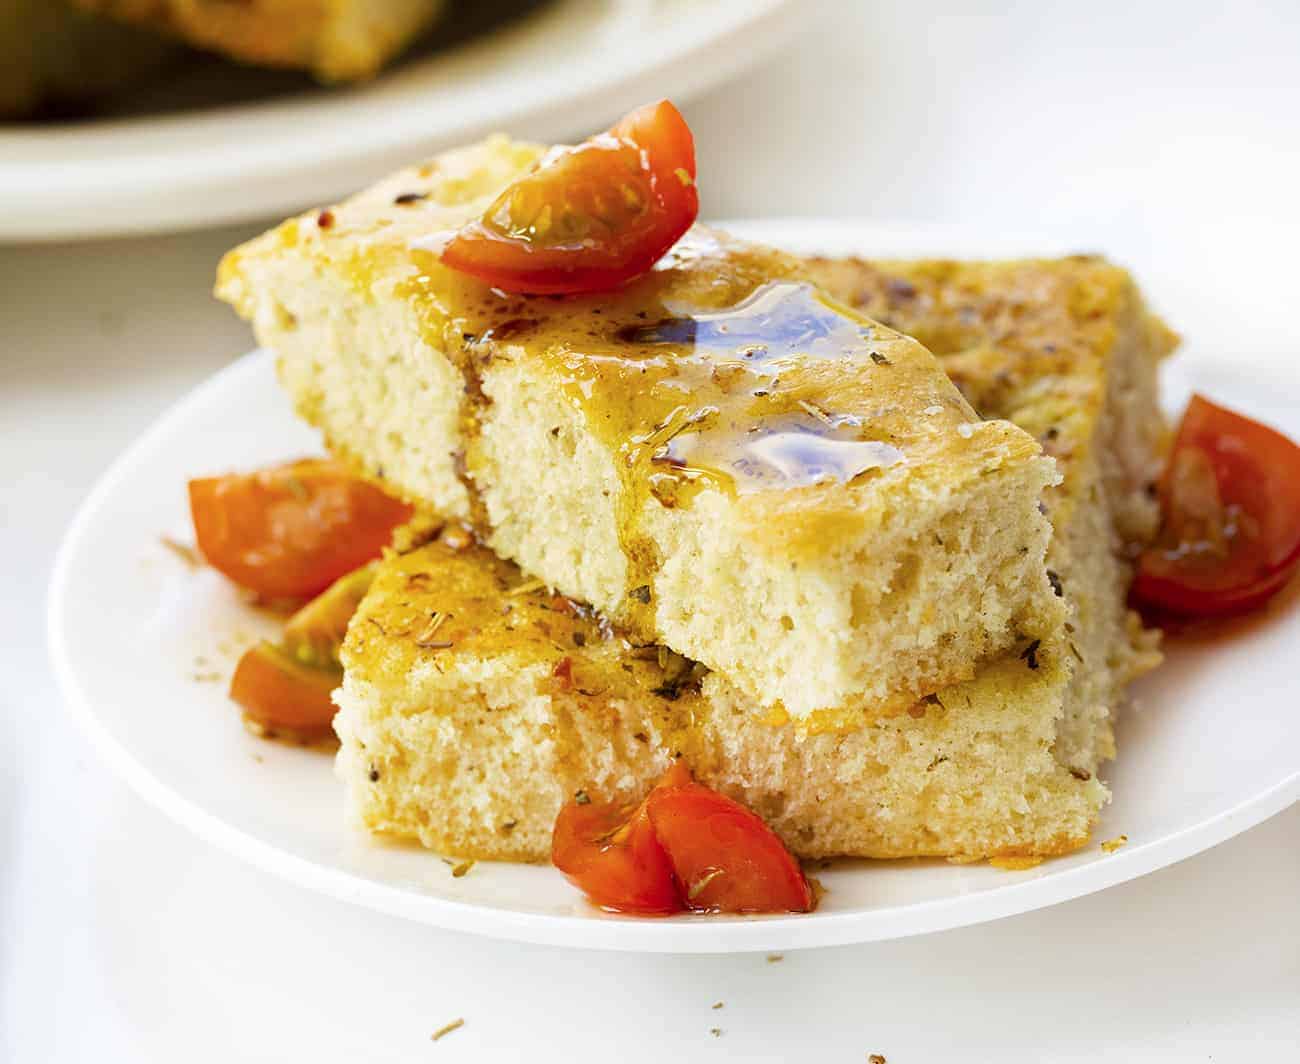 Focaccia Bread that has been Drizzled with Oil and Balsamic Vinegar on a White Plate with Tomato